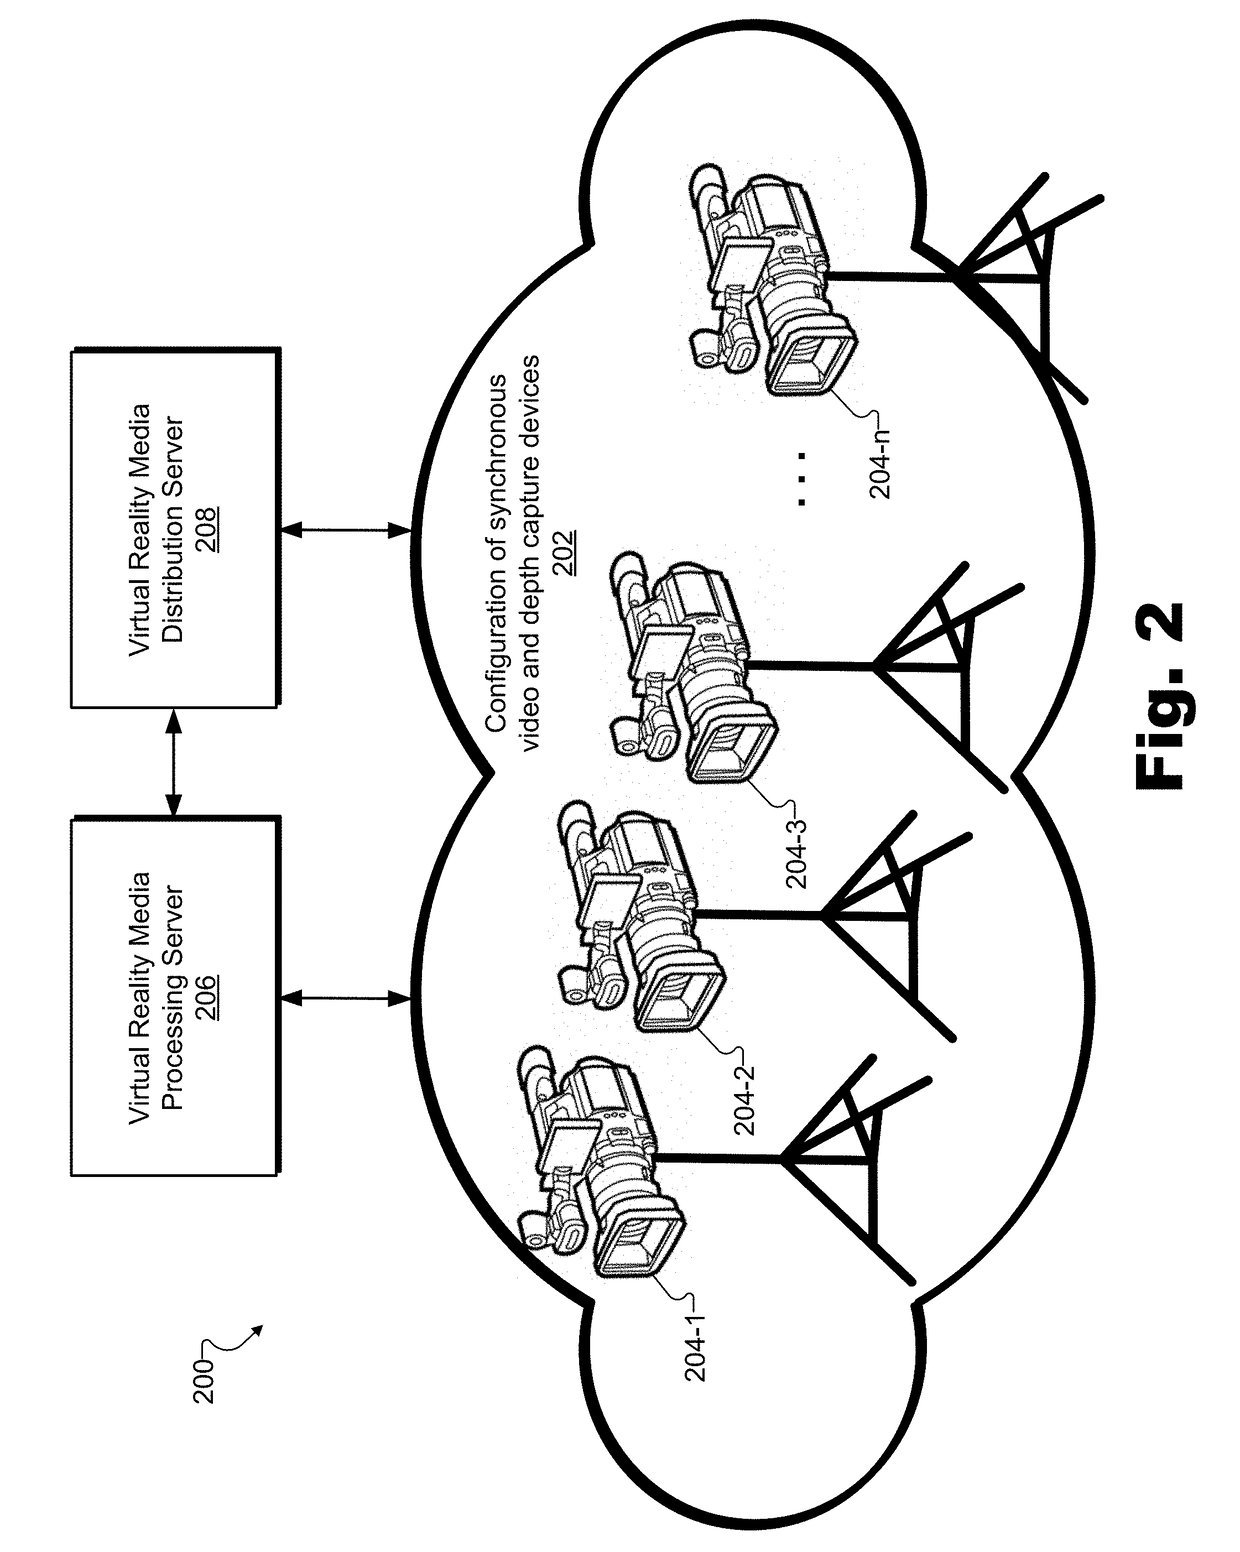 Methods and Systems for Creating and Providing a Real-Time Volumetric Representation of a Real-World Event